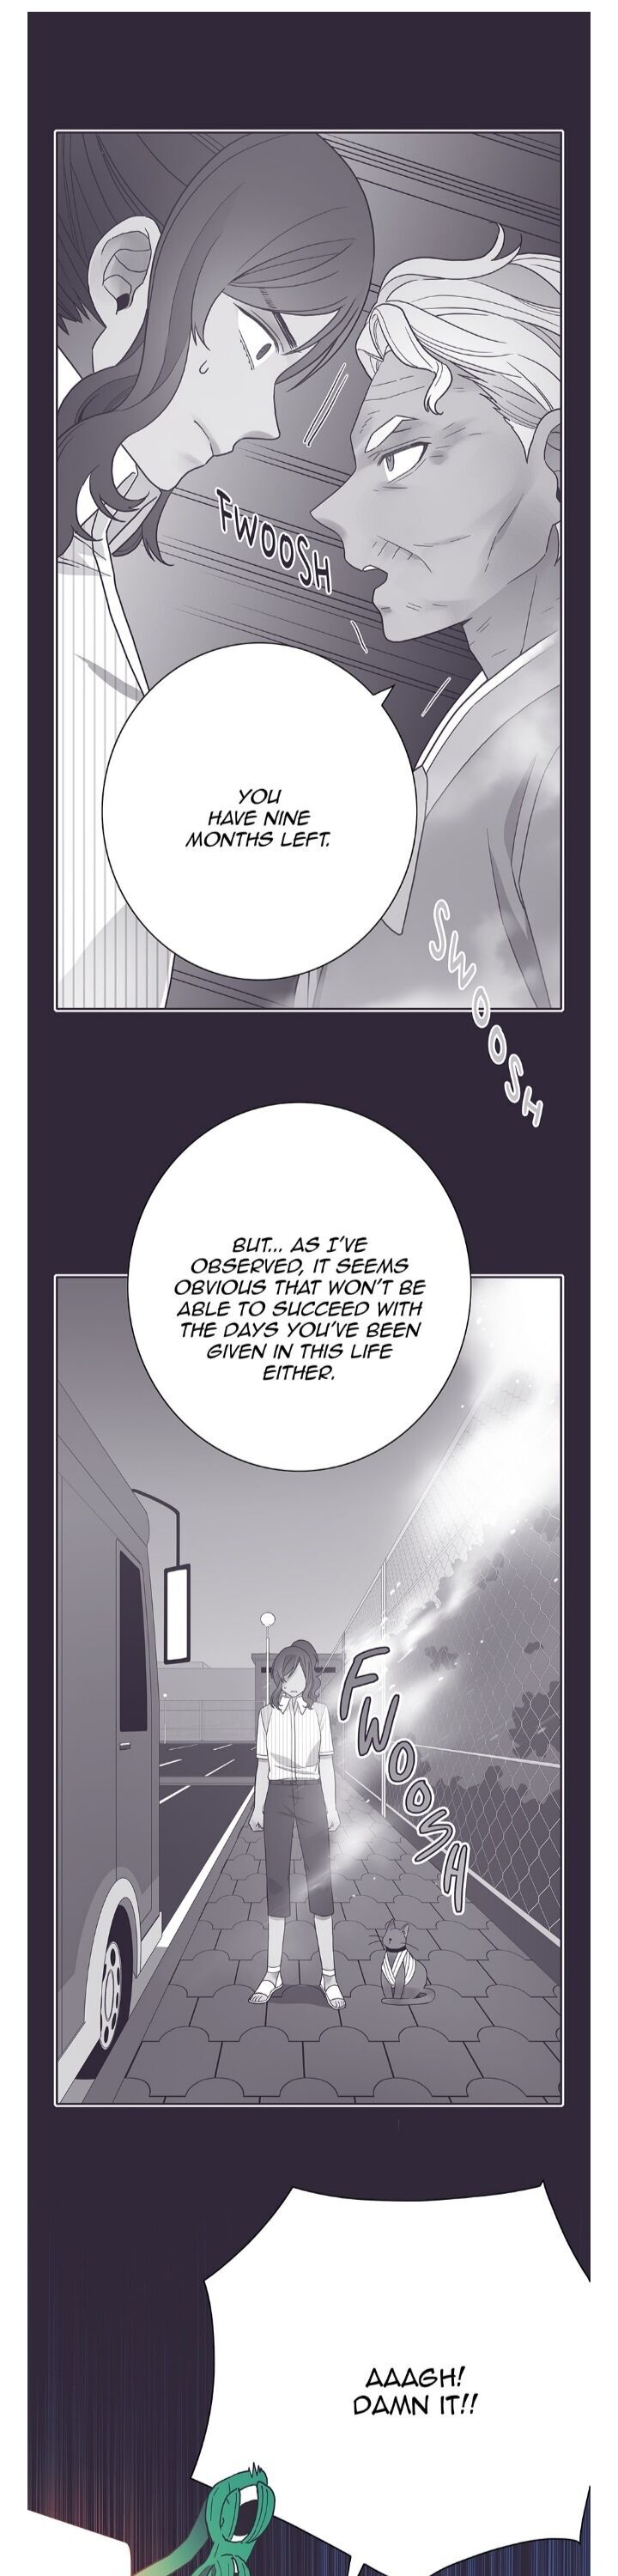 The Chef Of Spirits - Page 2